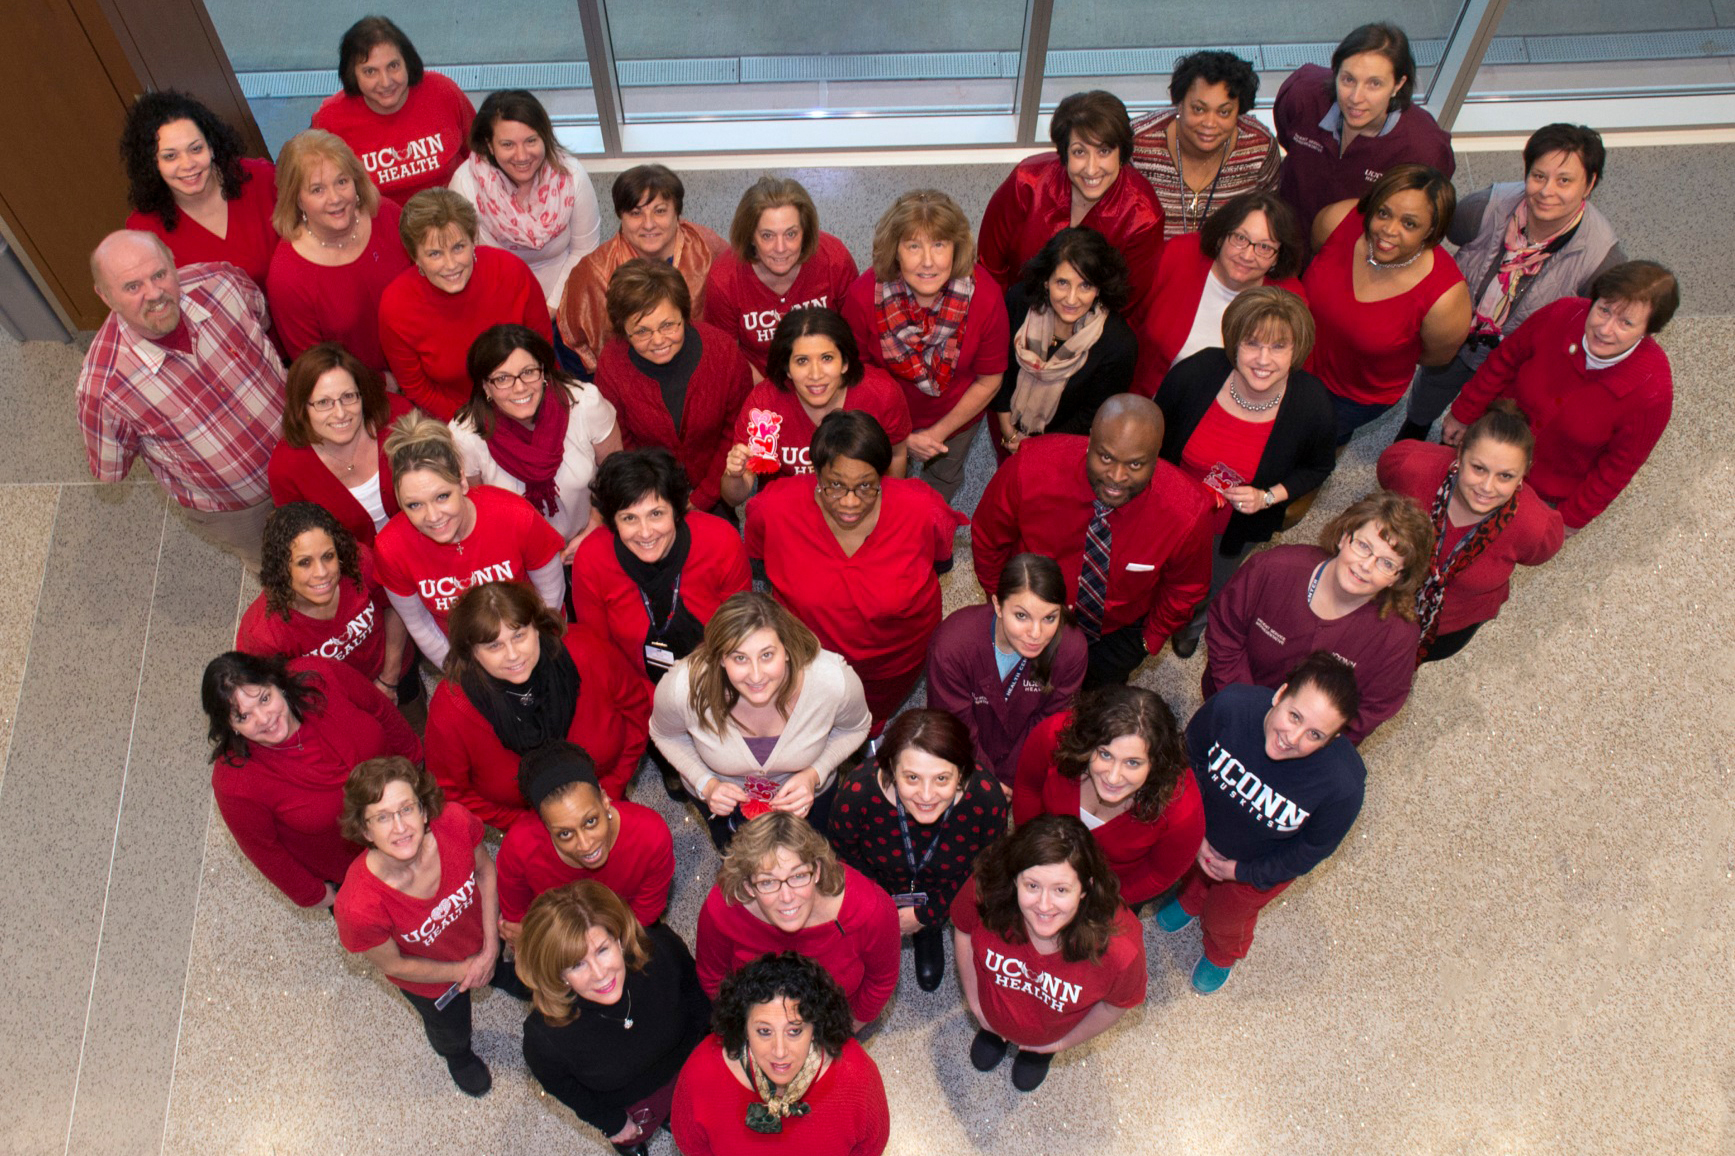 National Wear Red Day® & American Heart Month